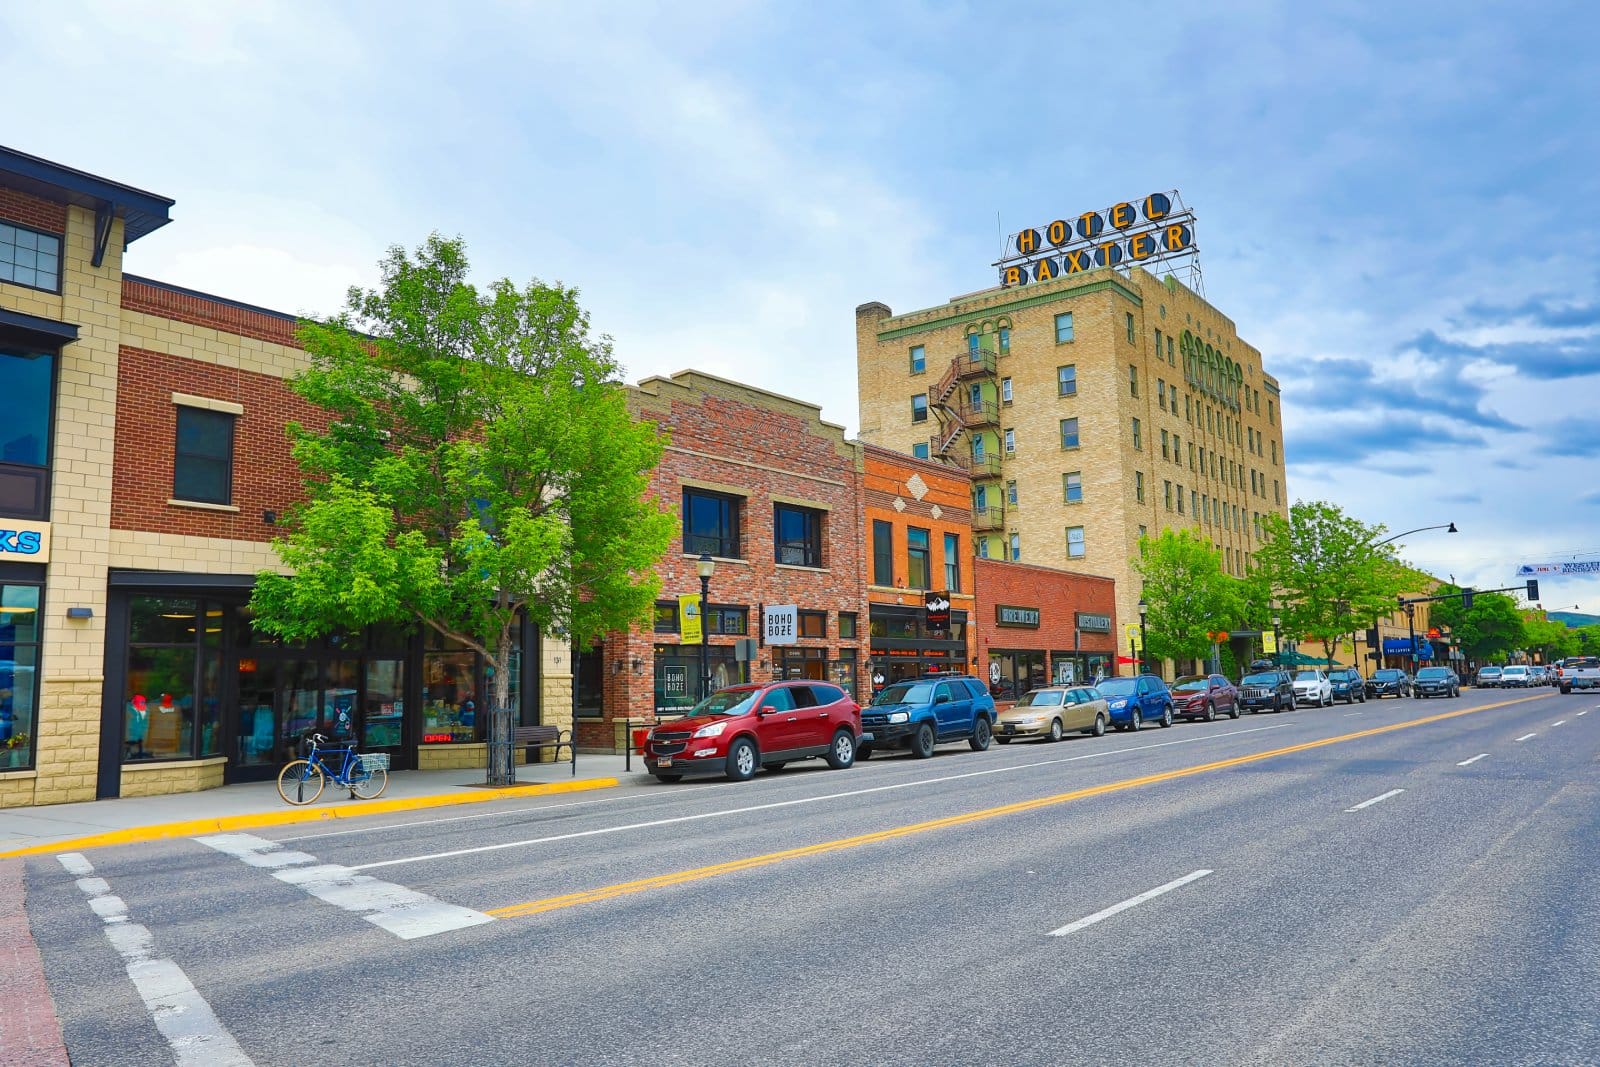 <p class="wp-caption-text">Image Credit: Shutterstock / aceshot1</p>  <p><span>Bozeman beckons with its outdoor splendor and bustling downtown. Whether you’re hitting the ski slopes or exploring local galleries, Bozeman is a mountain town with a twist.</span></p>